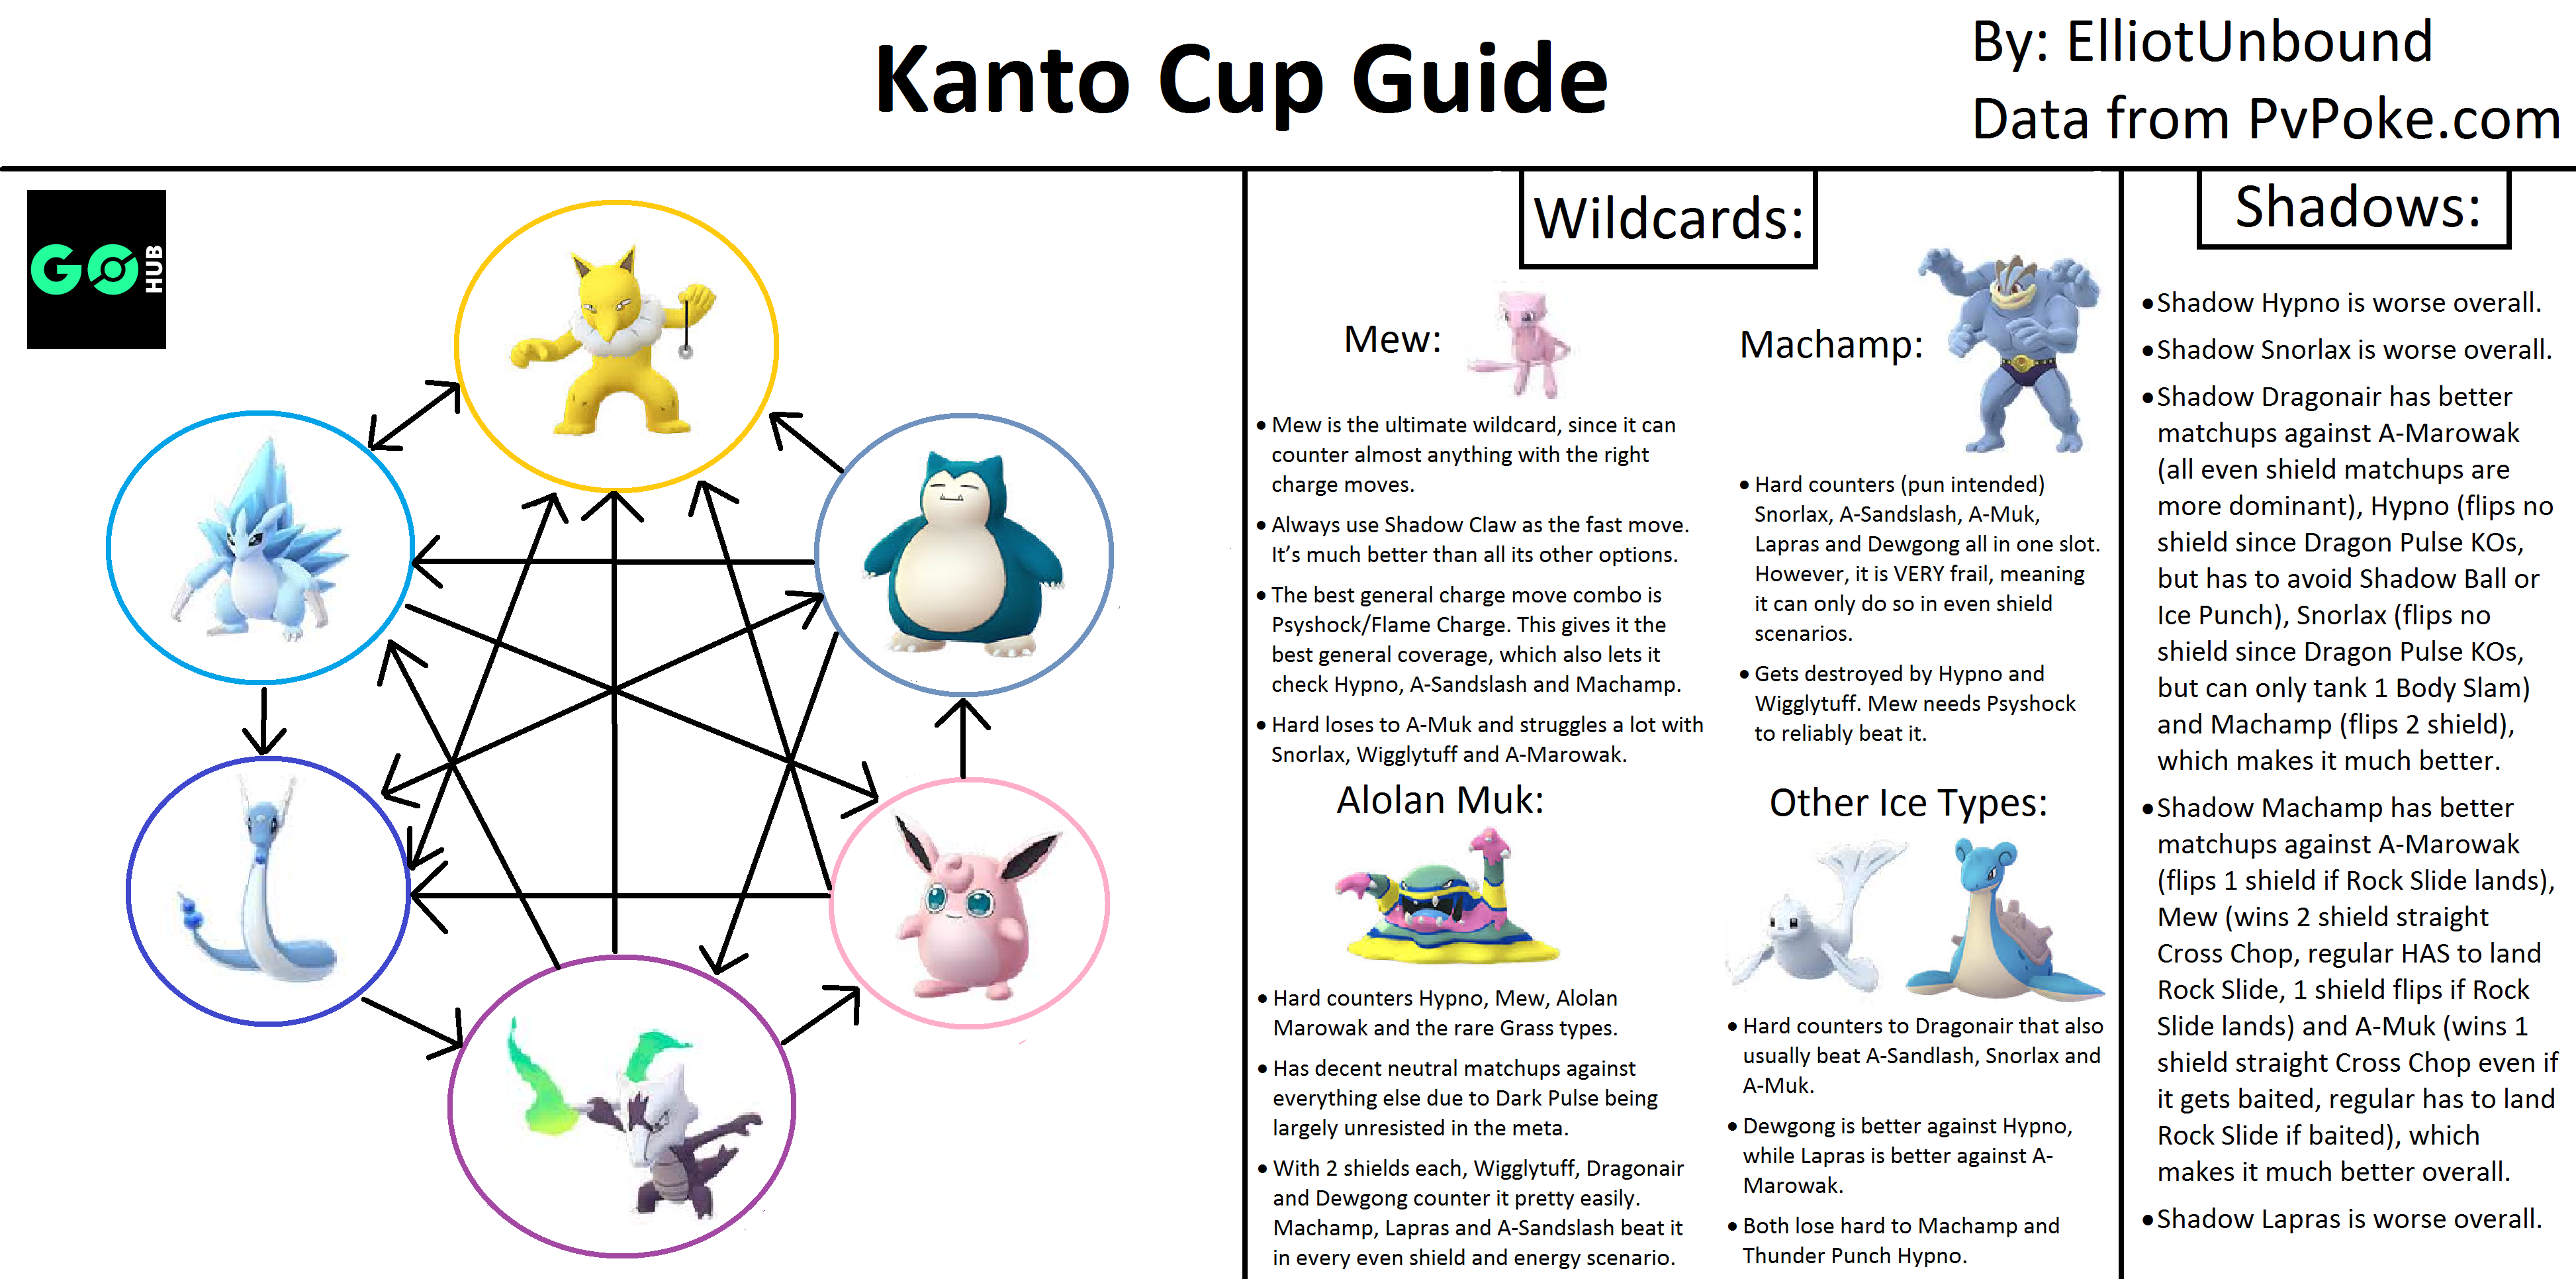 The Kanto Cup PvP Guide